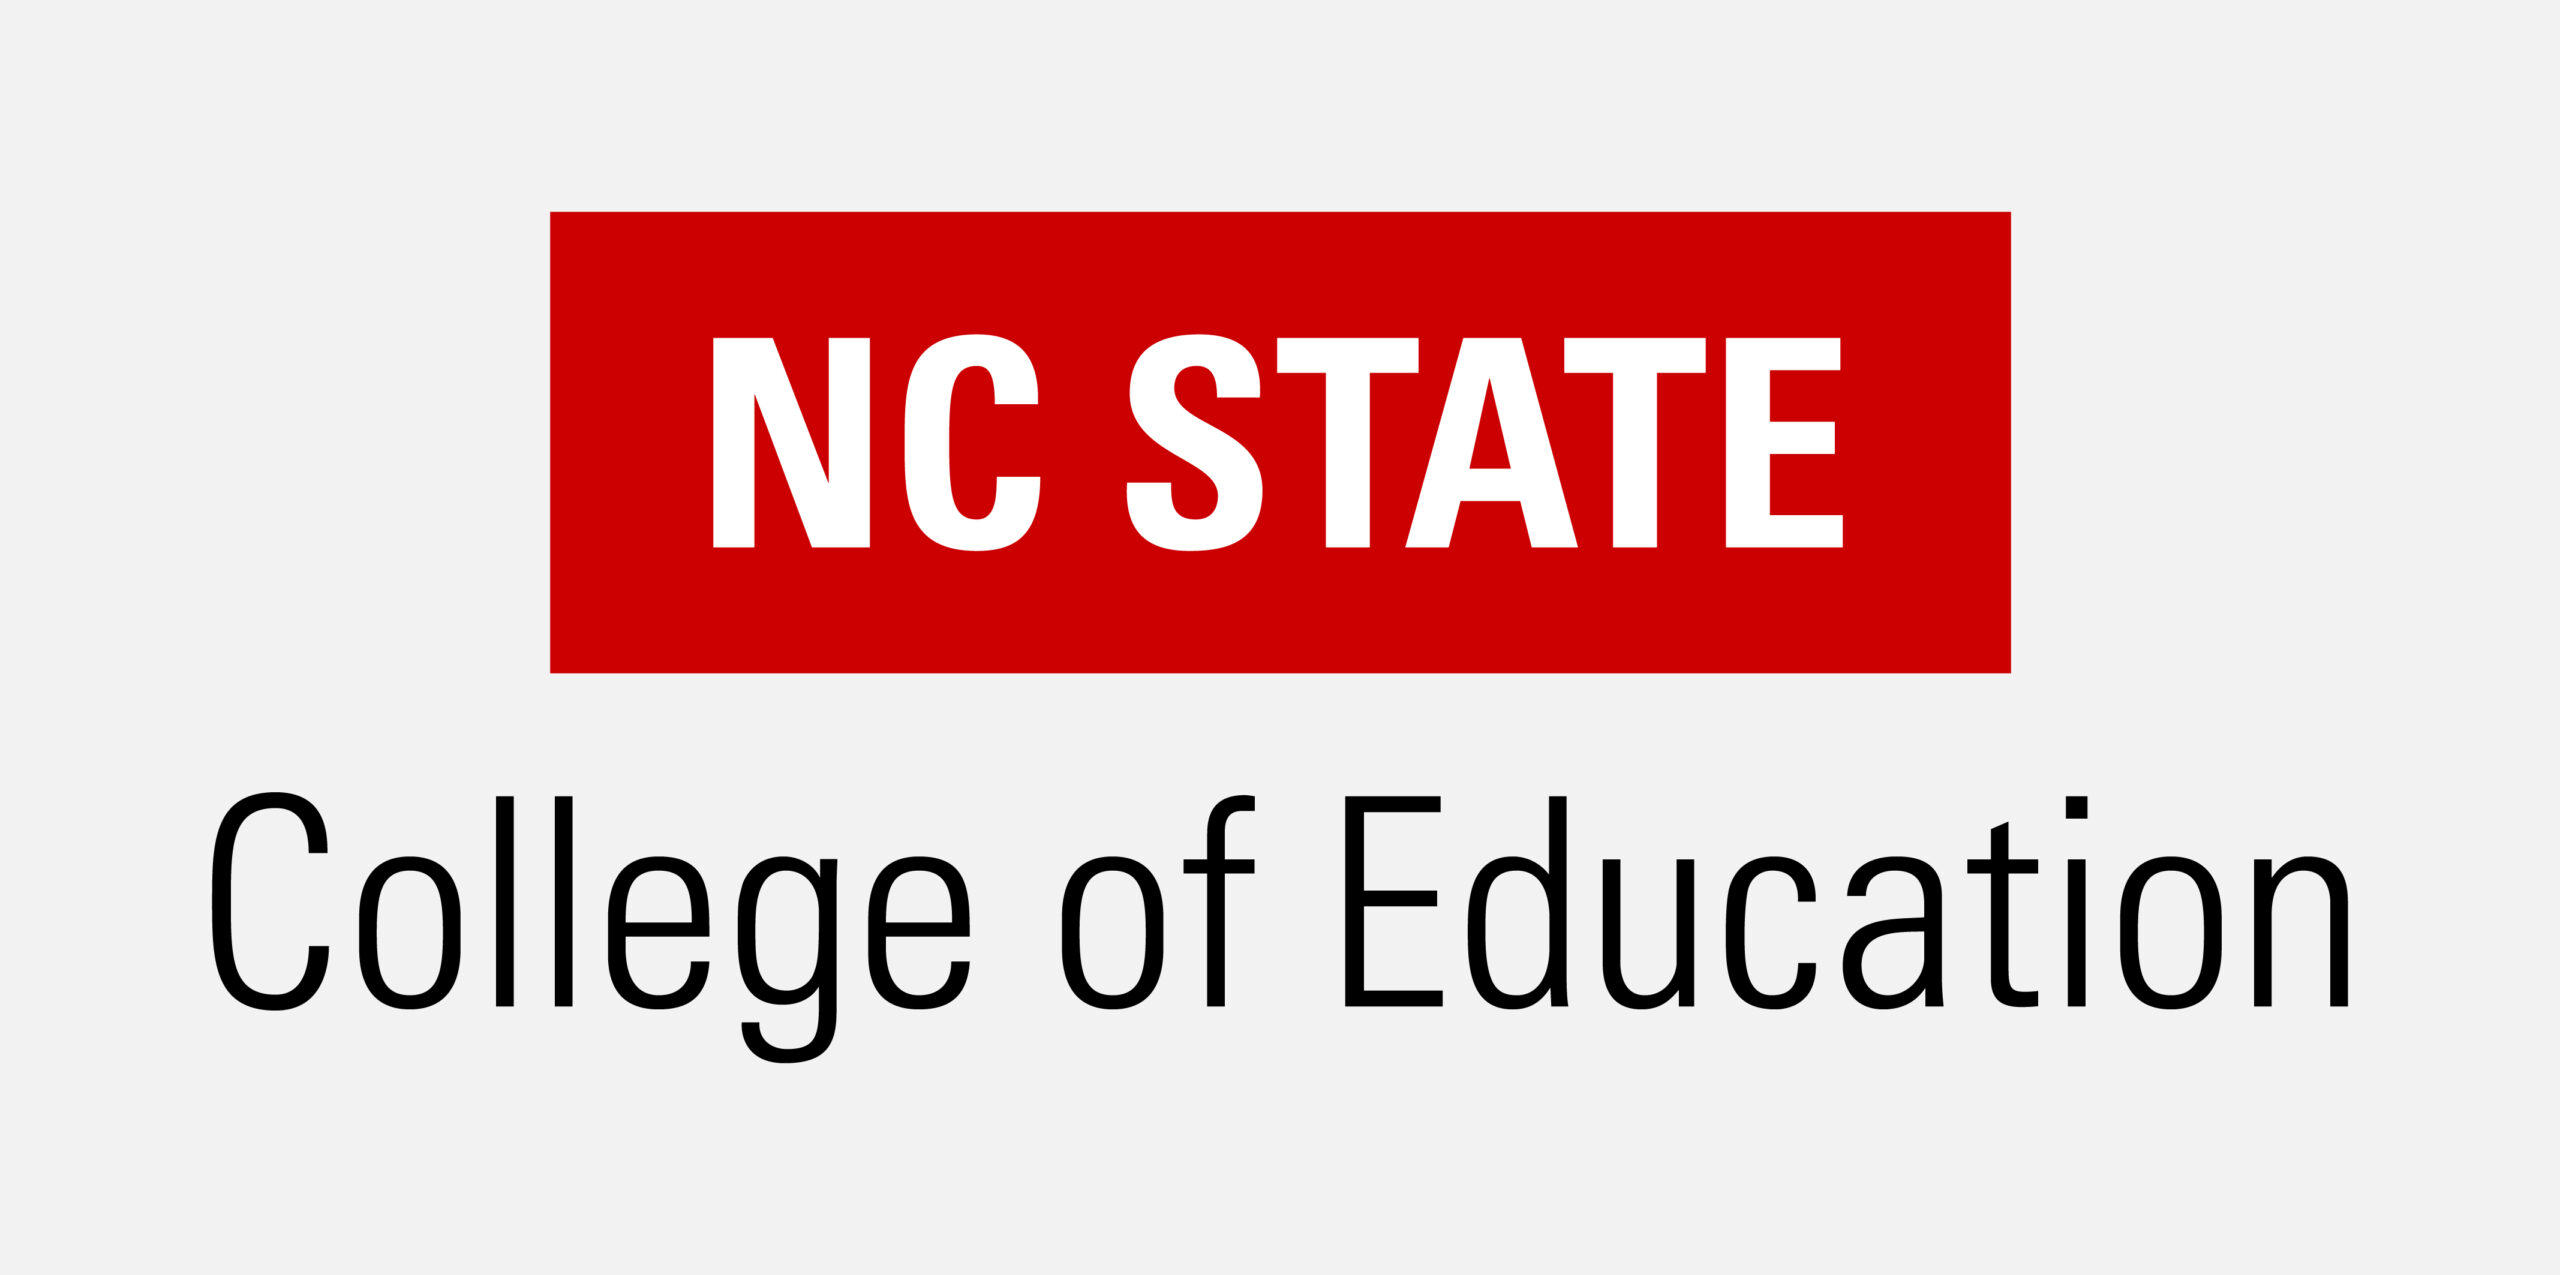 NC State College of Education wordmark on light gray background